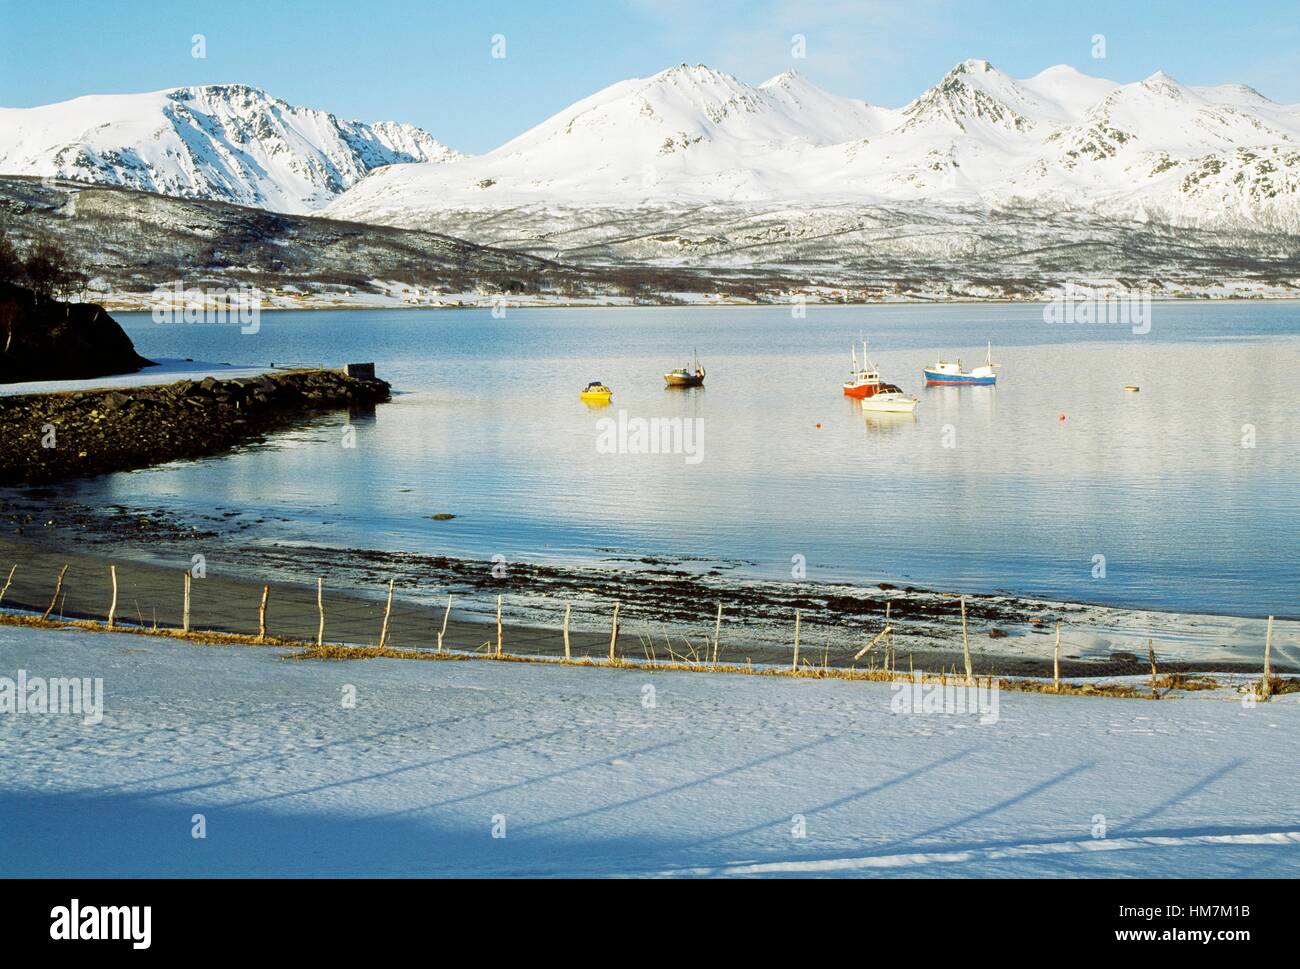 Boats in the Reisafjord, Troms county, Norway. Stock Photo